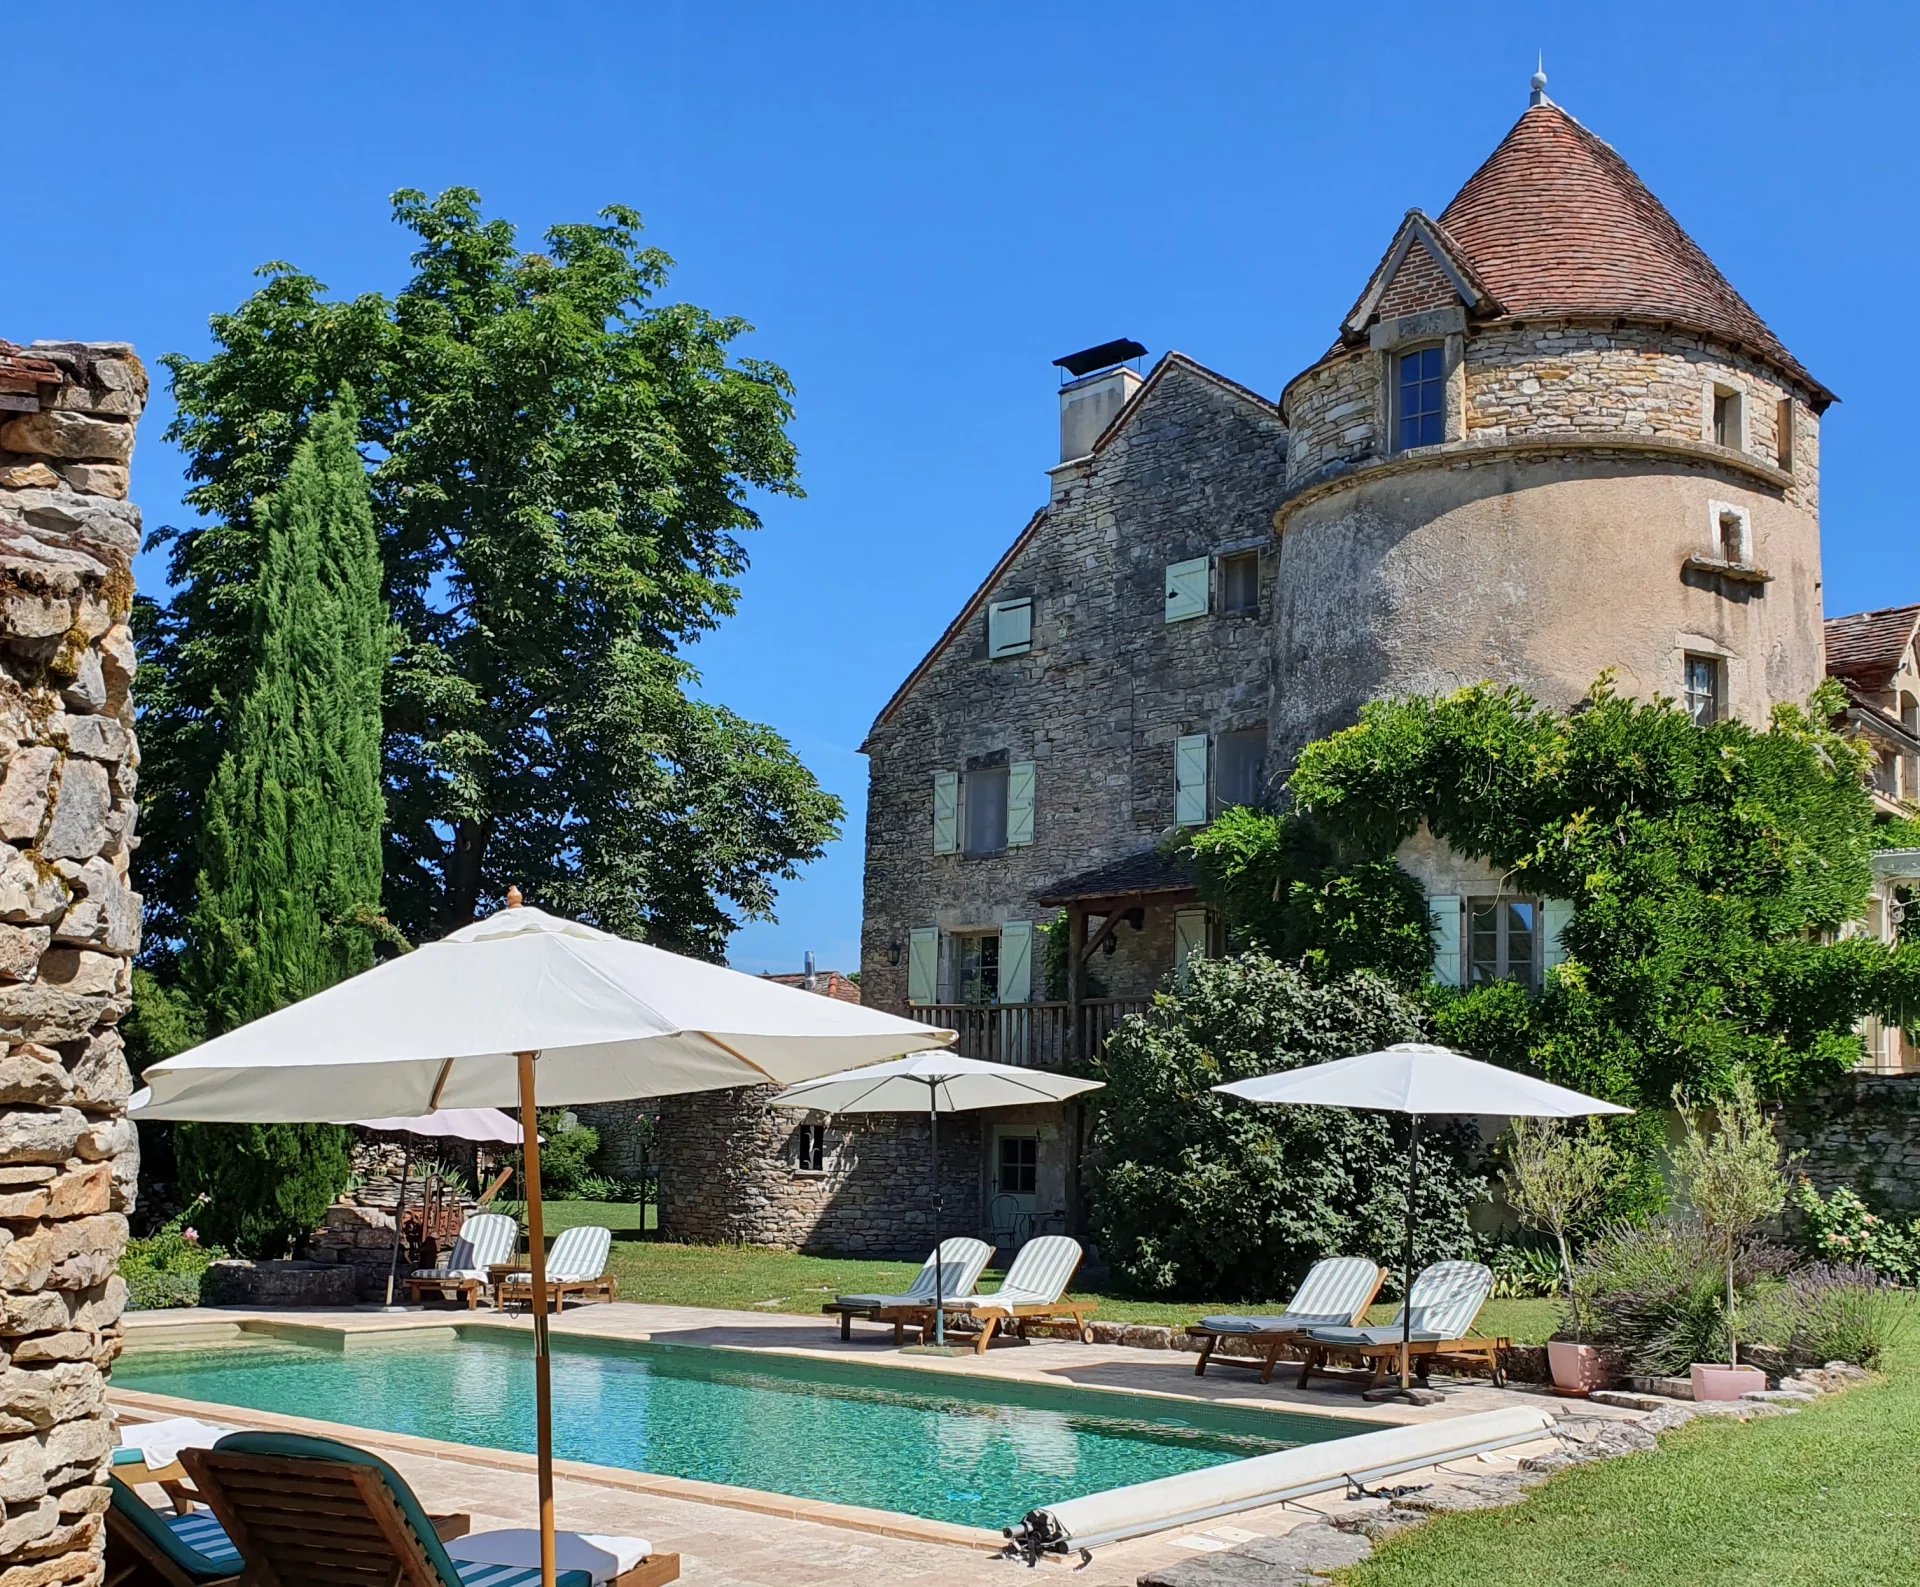 Remarkable and unusual 15th-century manor house